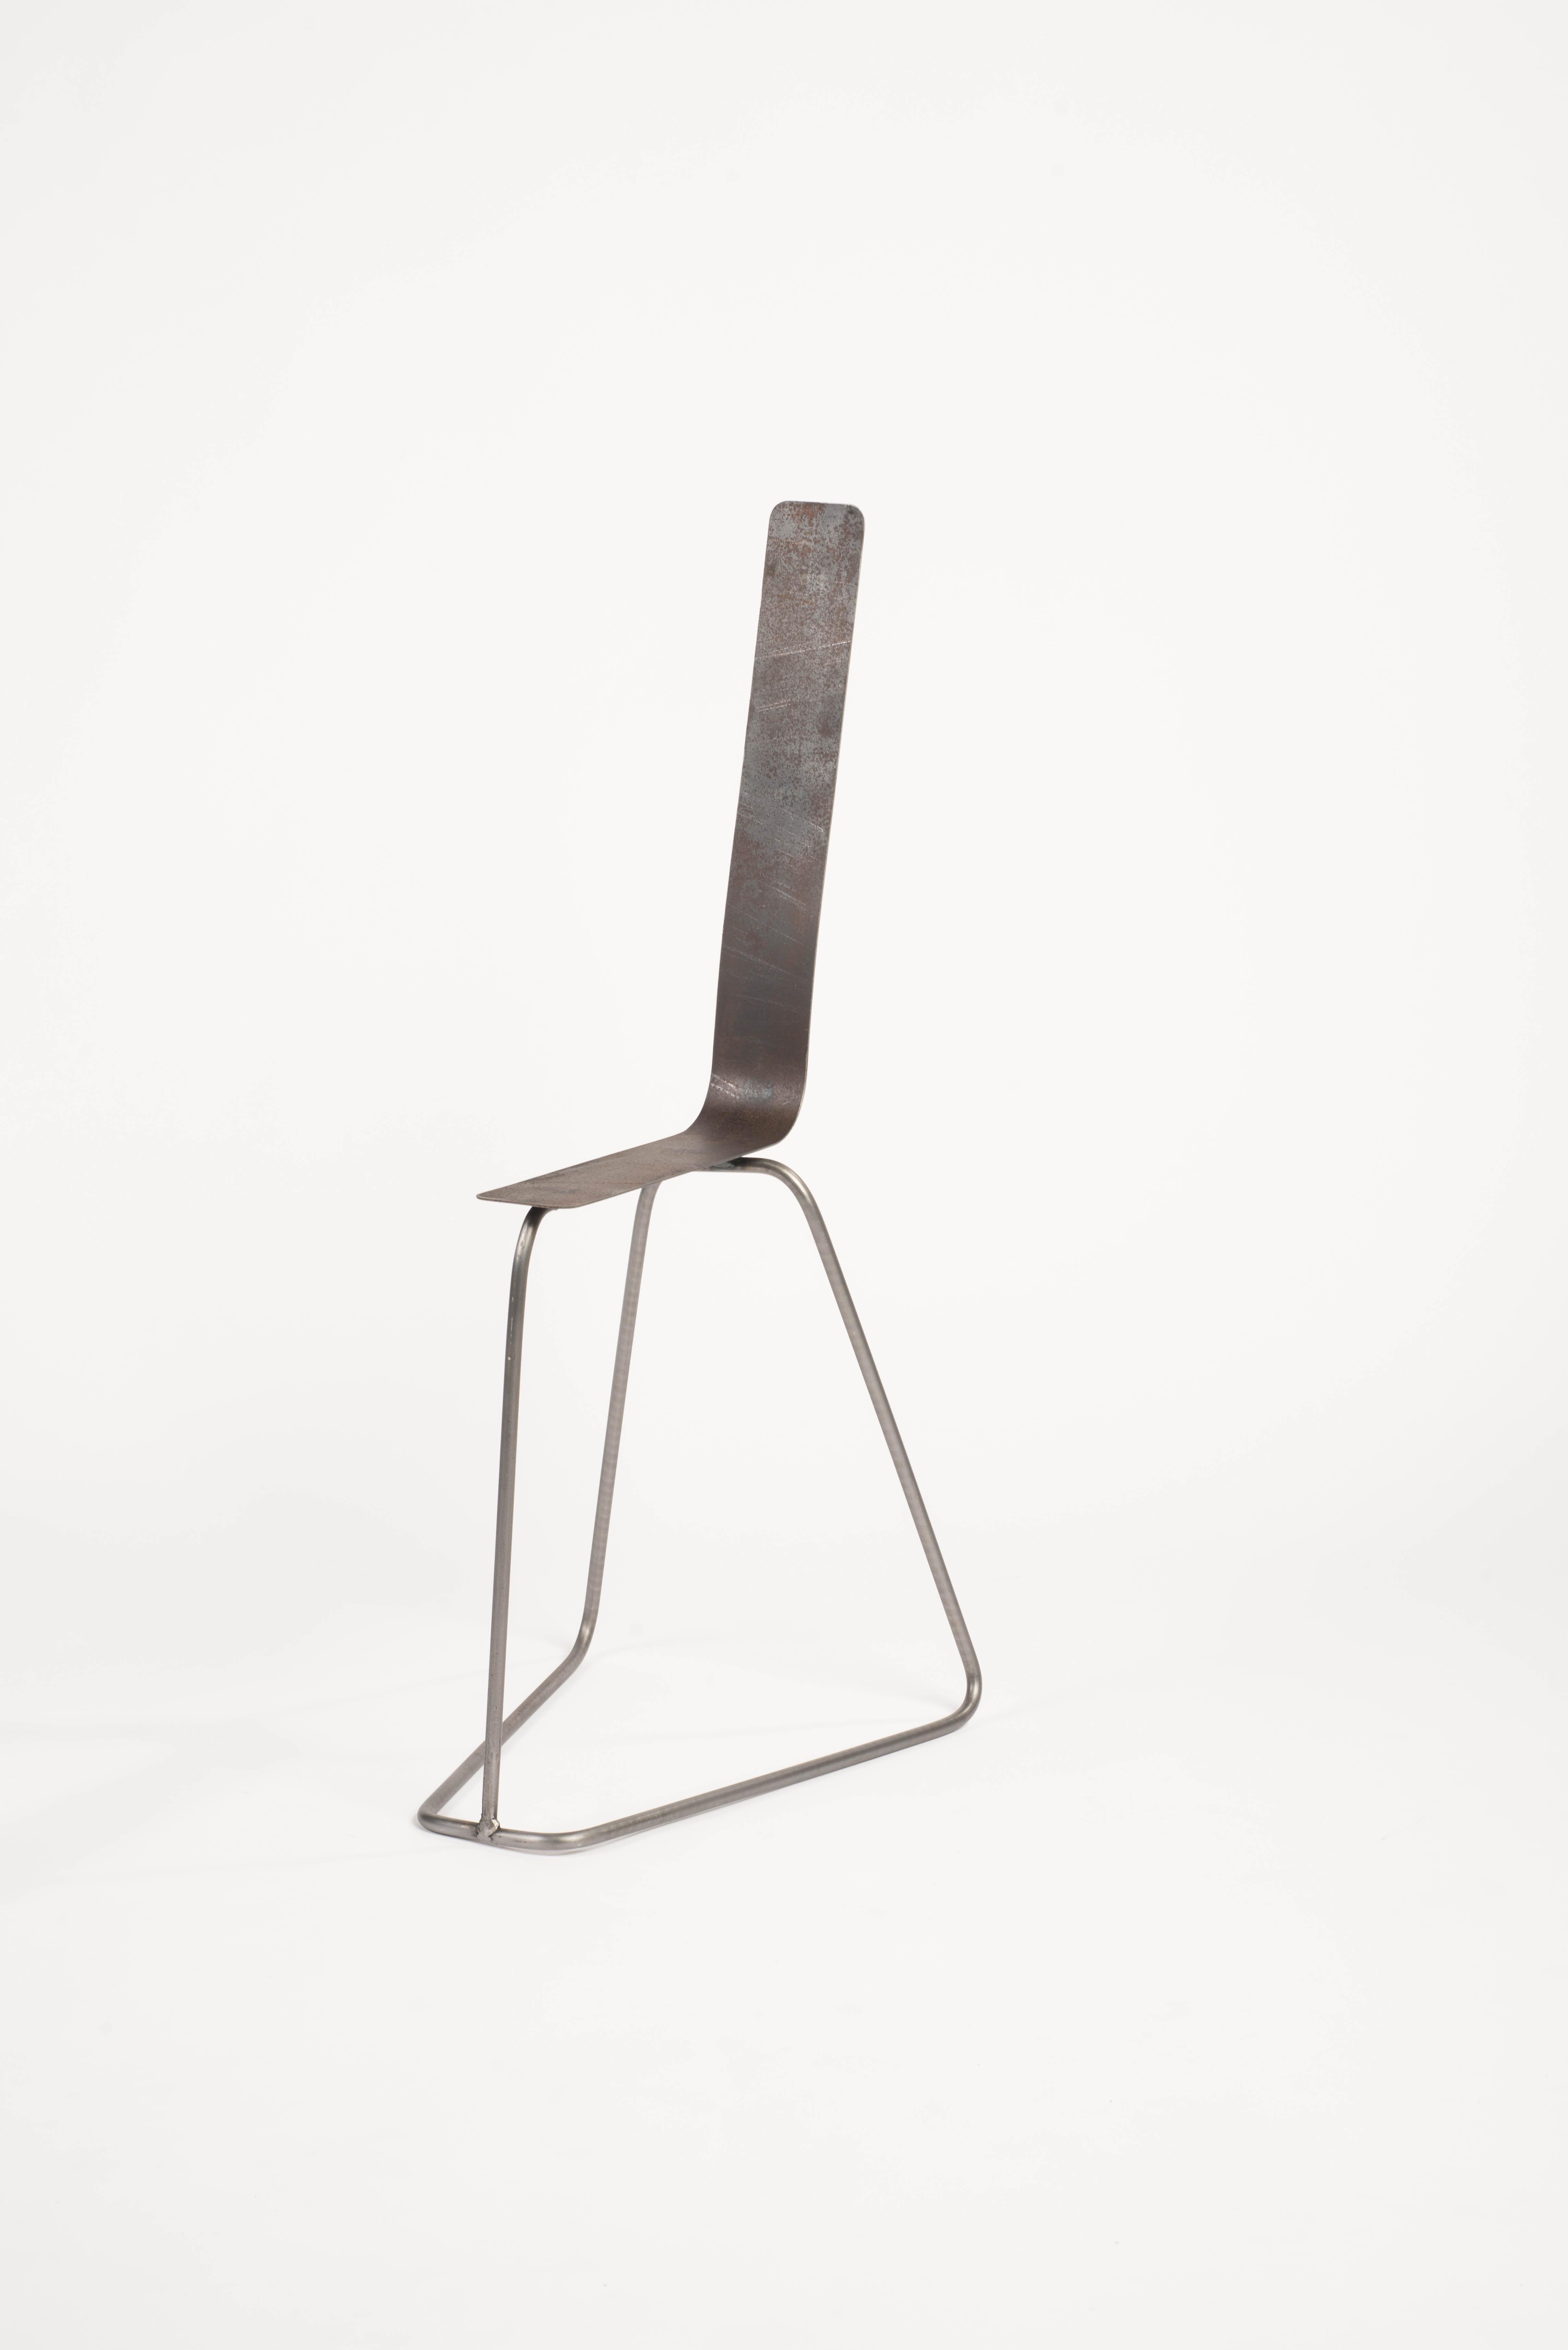 Slim chair by Neil Nenner
Punctuation marks
Dimensions: H 90 x L 48 x W 40 cm
Materials: Steel tubes and rods with a natural finish
 Corten sheets 
 
Neil Nenner (b.1977, Kibbutz Mevo Hama), Independent designer / Artist and lecture in